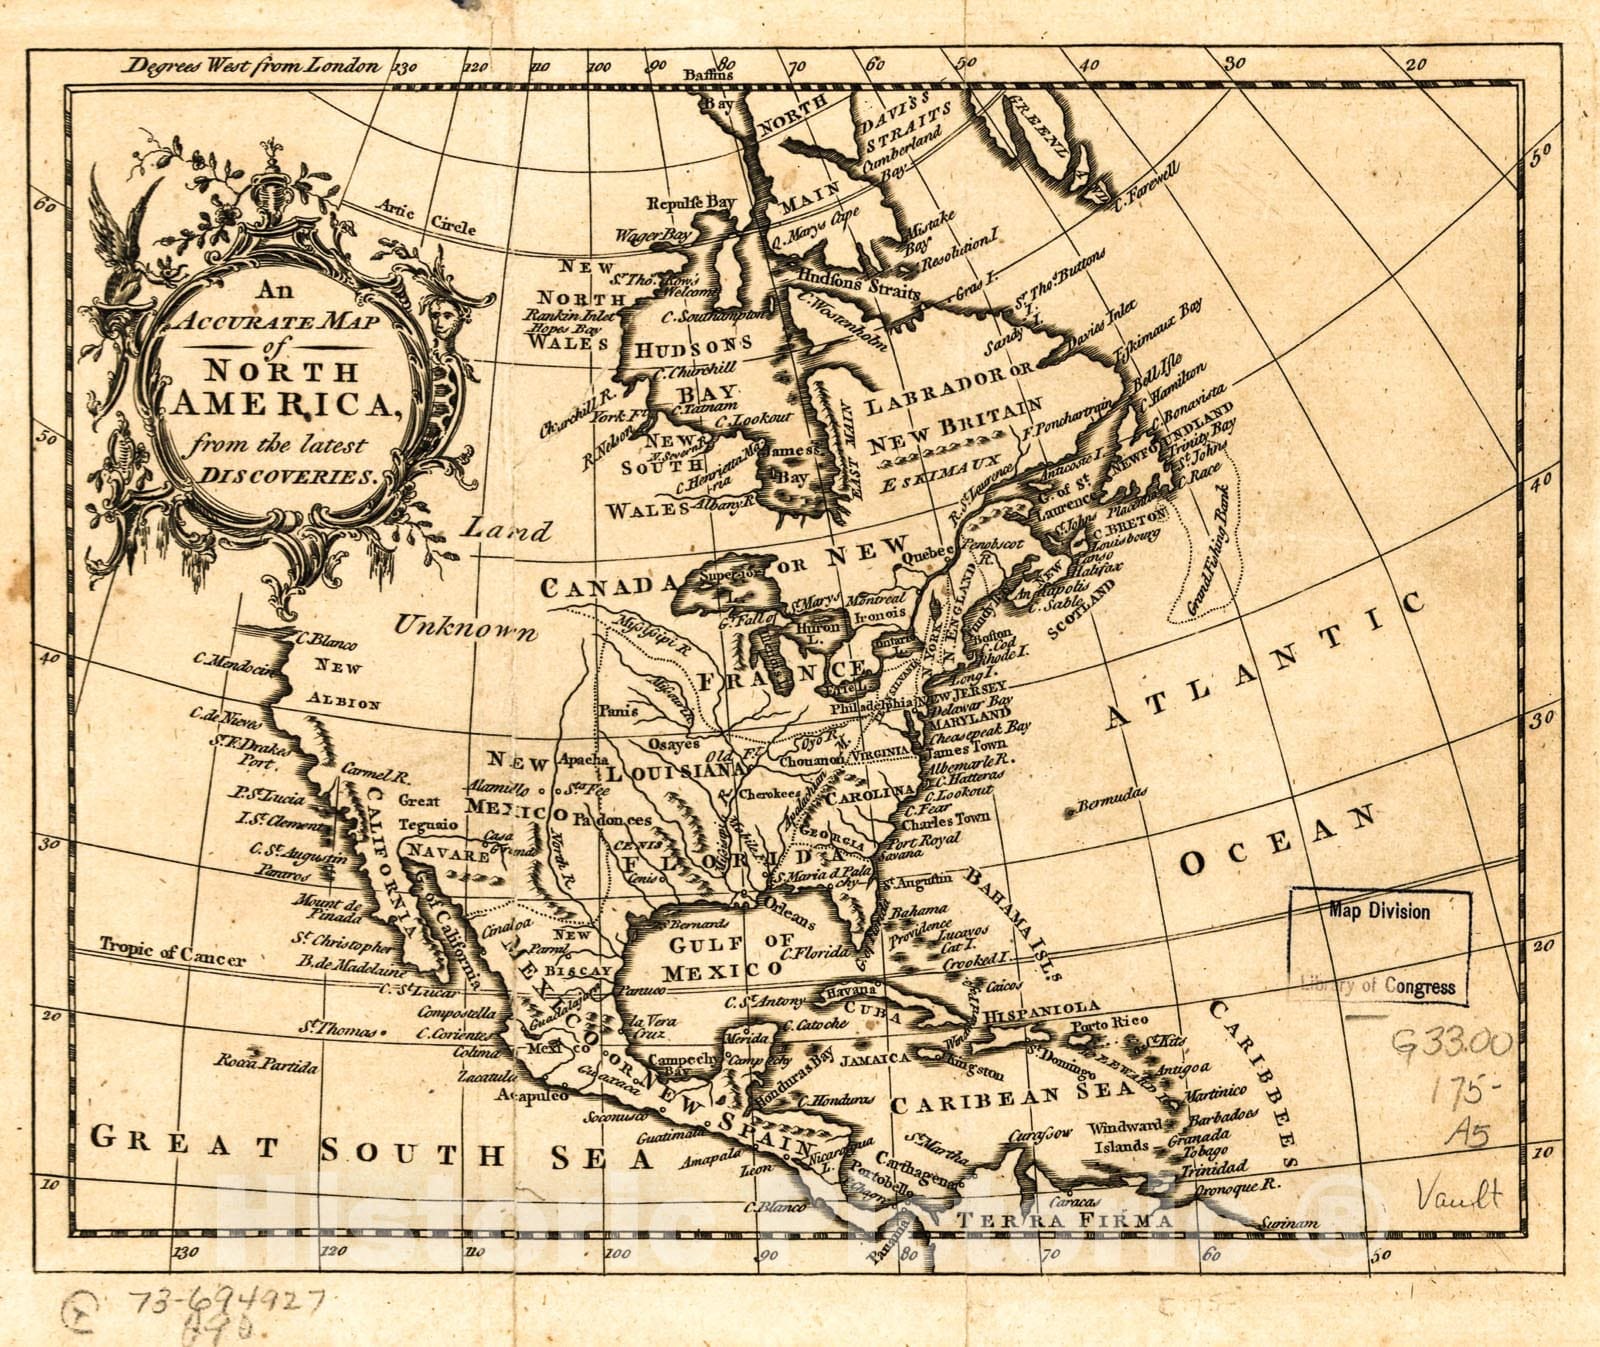 Historic 1750 Map - an Accurate map of North America from The Latest Discoveries.